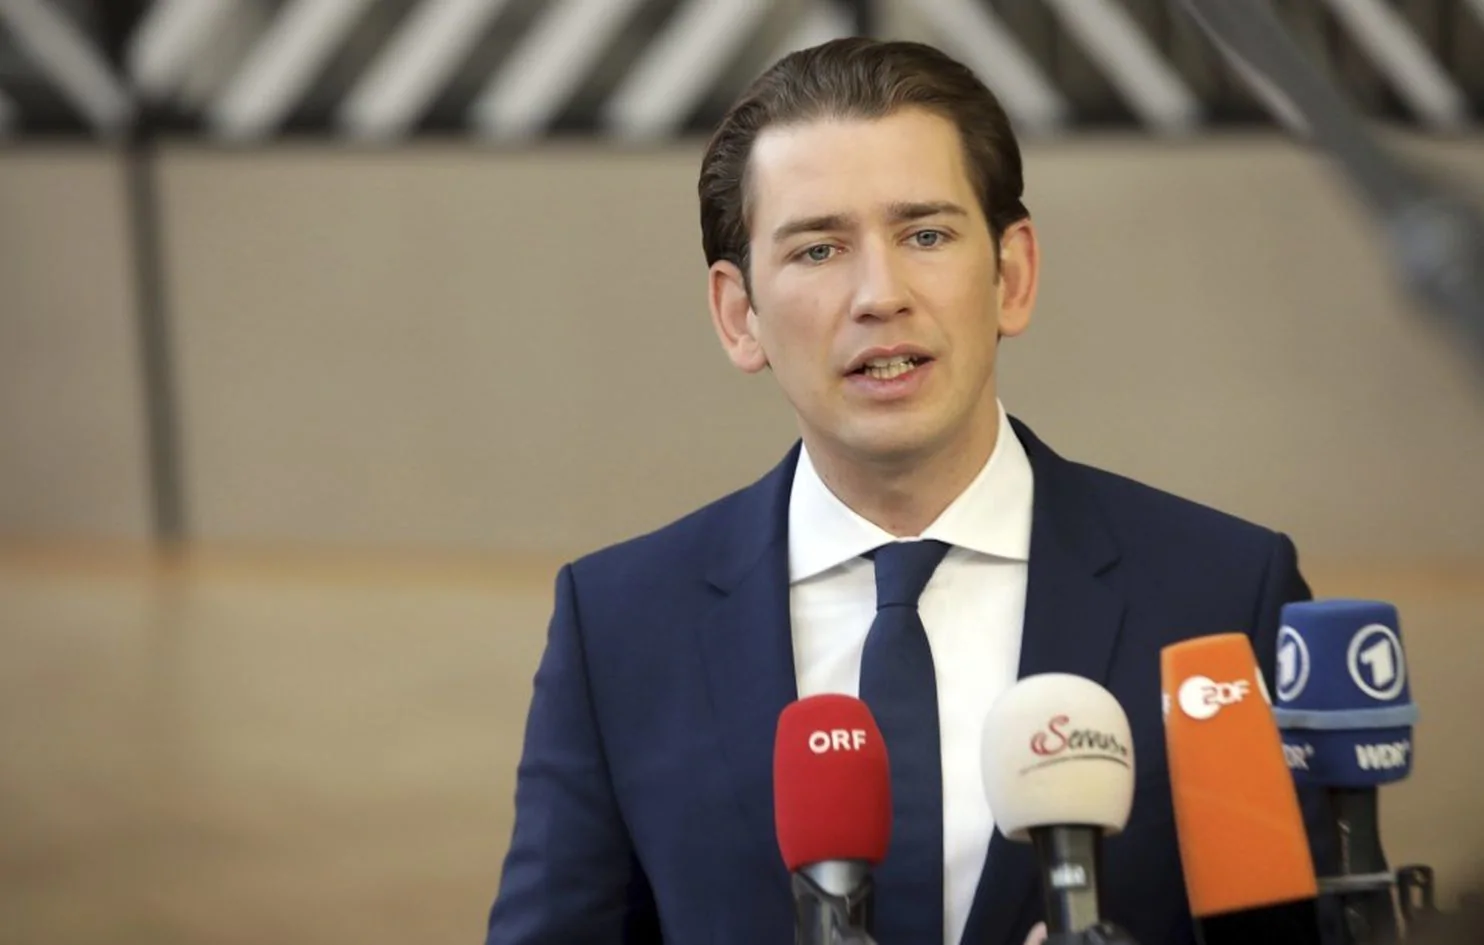 Austria now holds the E.U. presidency. Expect a tougher stance on immigration.